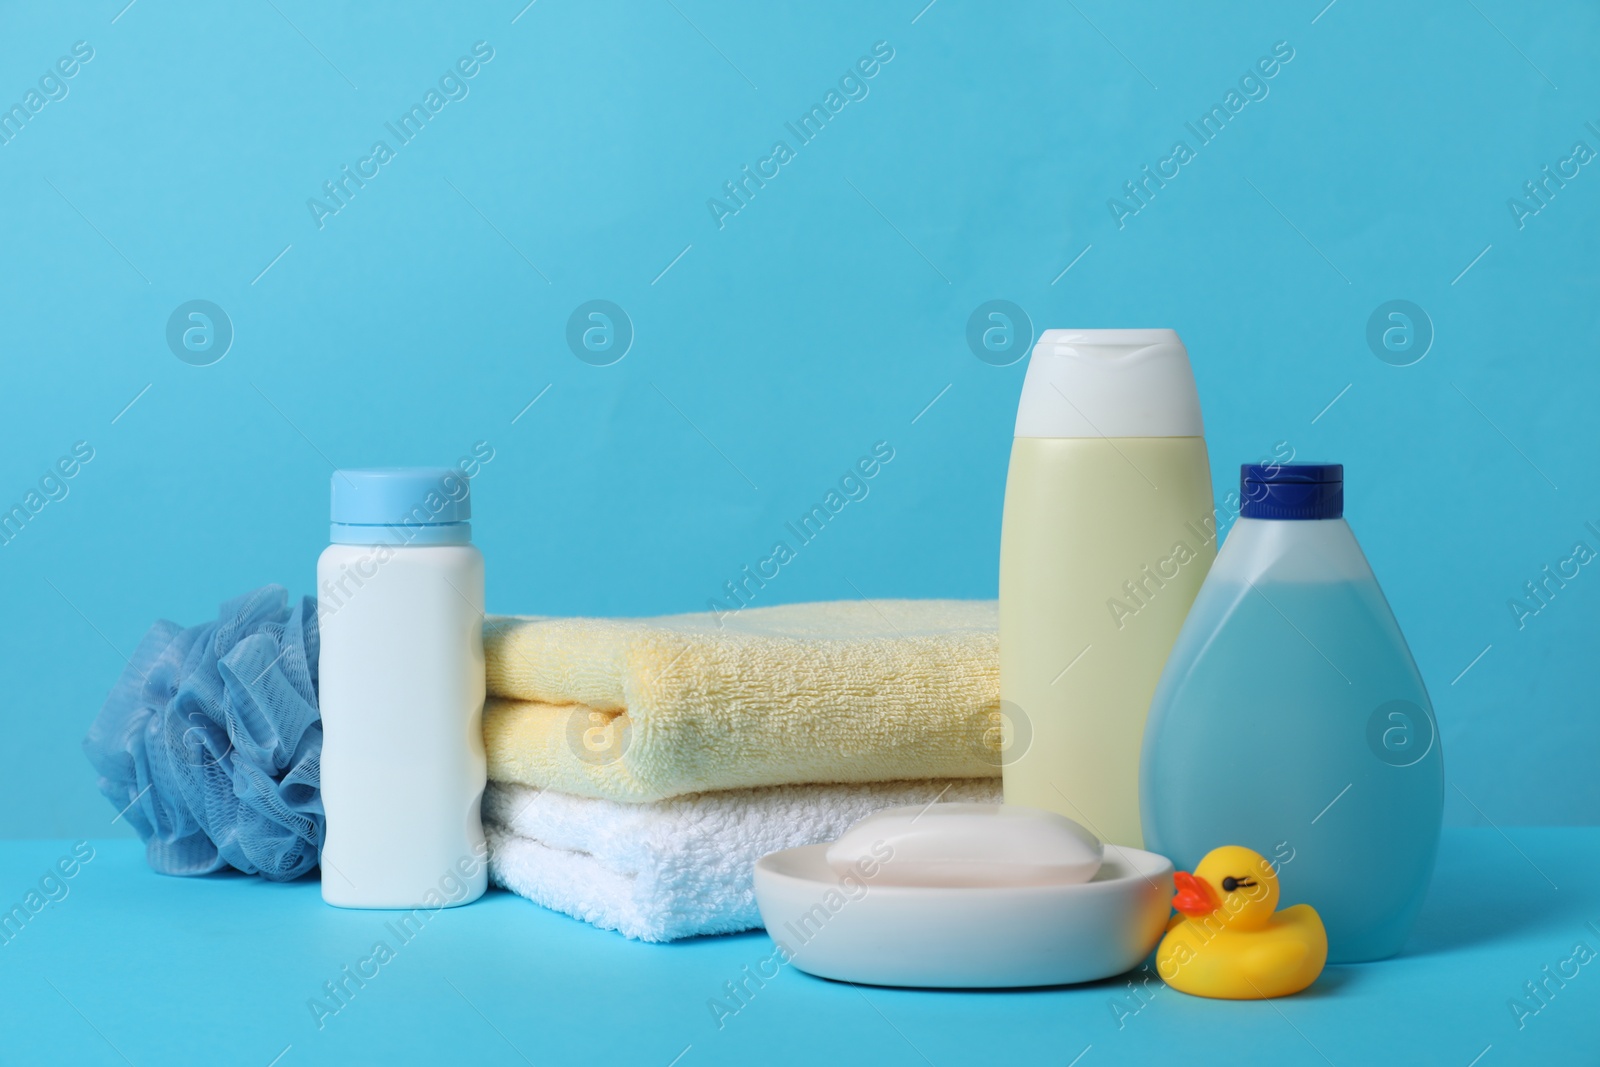 Photo of Baby cosmetic products, bath duck, sponge and towels on light blue background